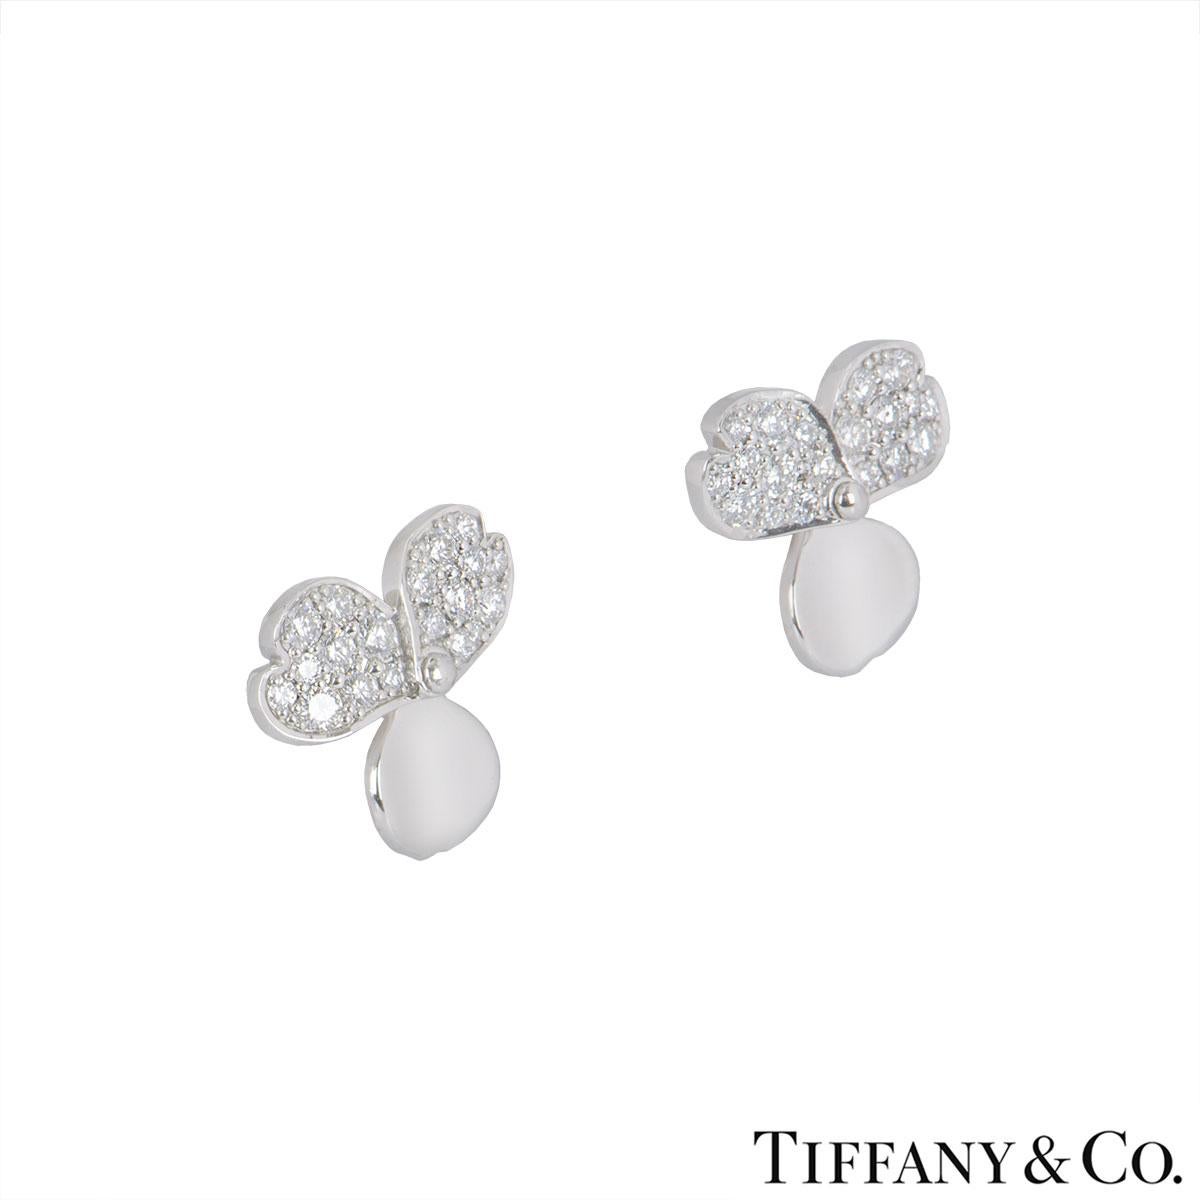 A pair of platinum diamond earrings by Tiffany & Co. from the Paper Flowers collection. The earrings are made up a flower motif with 3 petals, 2 pave set with 38 round brilliant cut diamonds with a total diamond weight of 0.34ct. The earrings have a